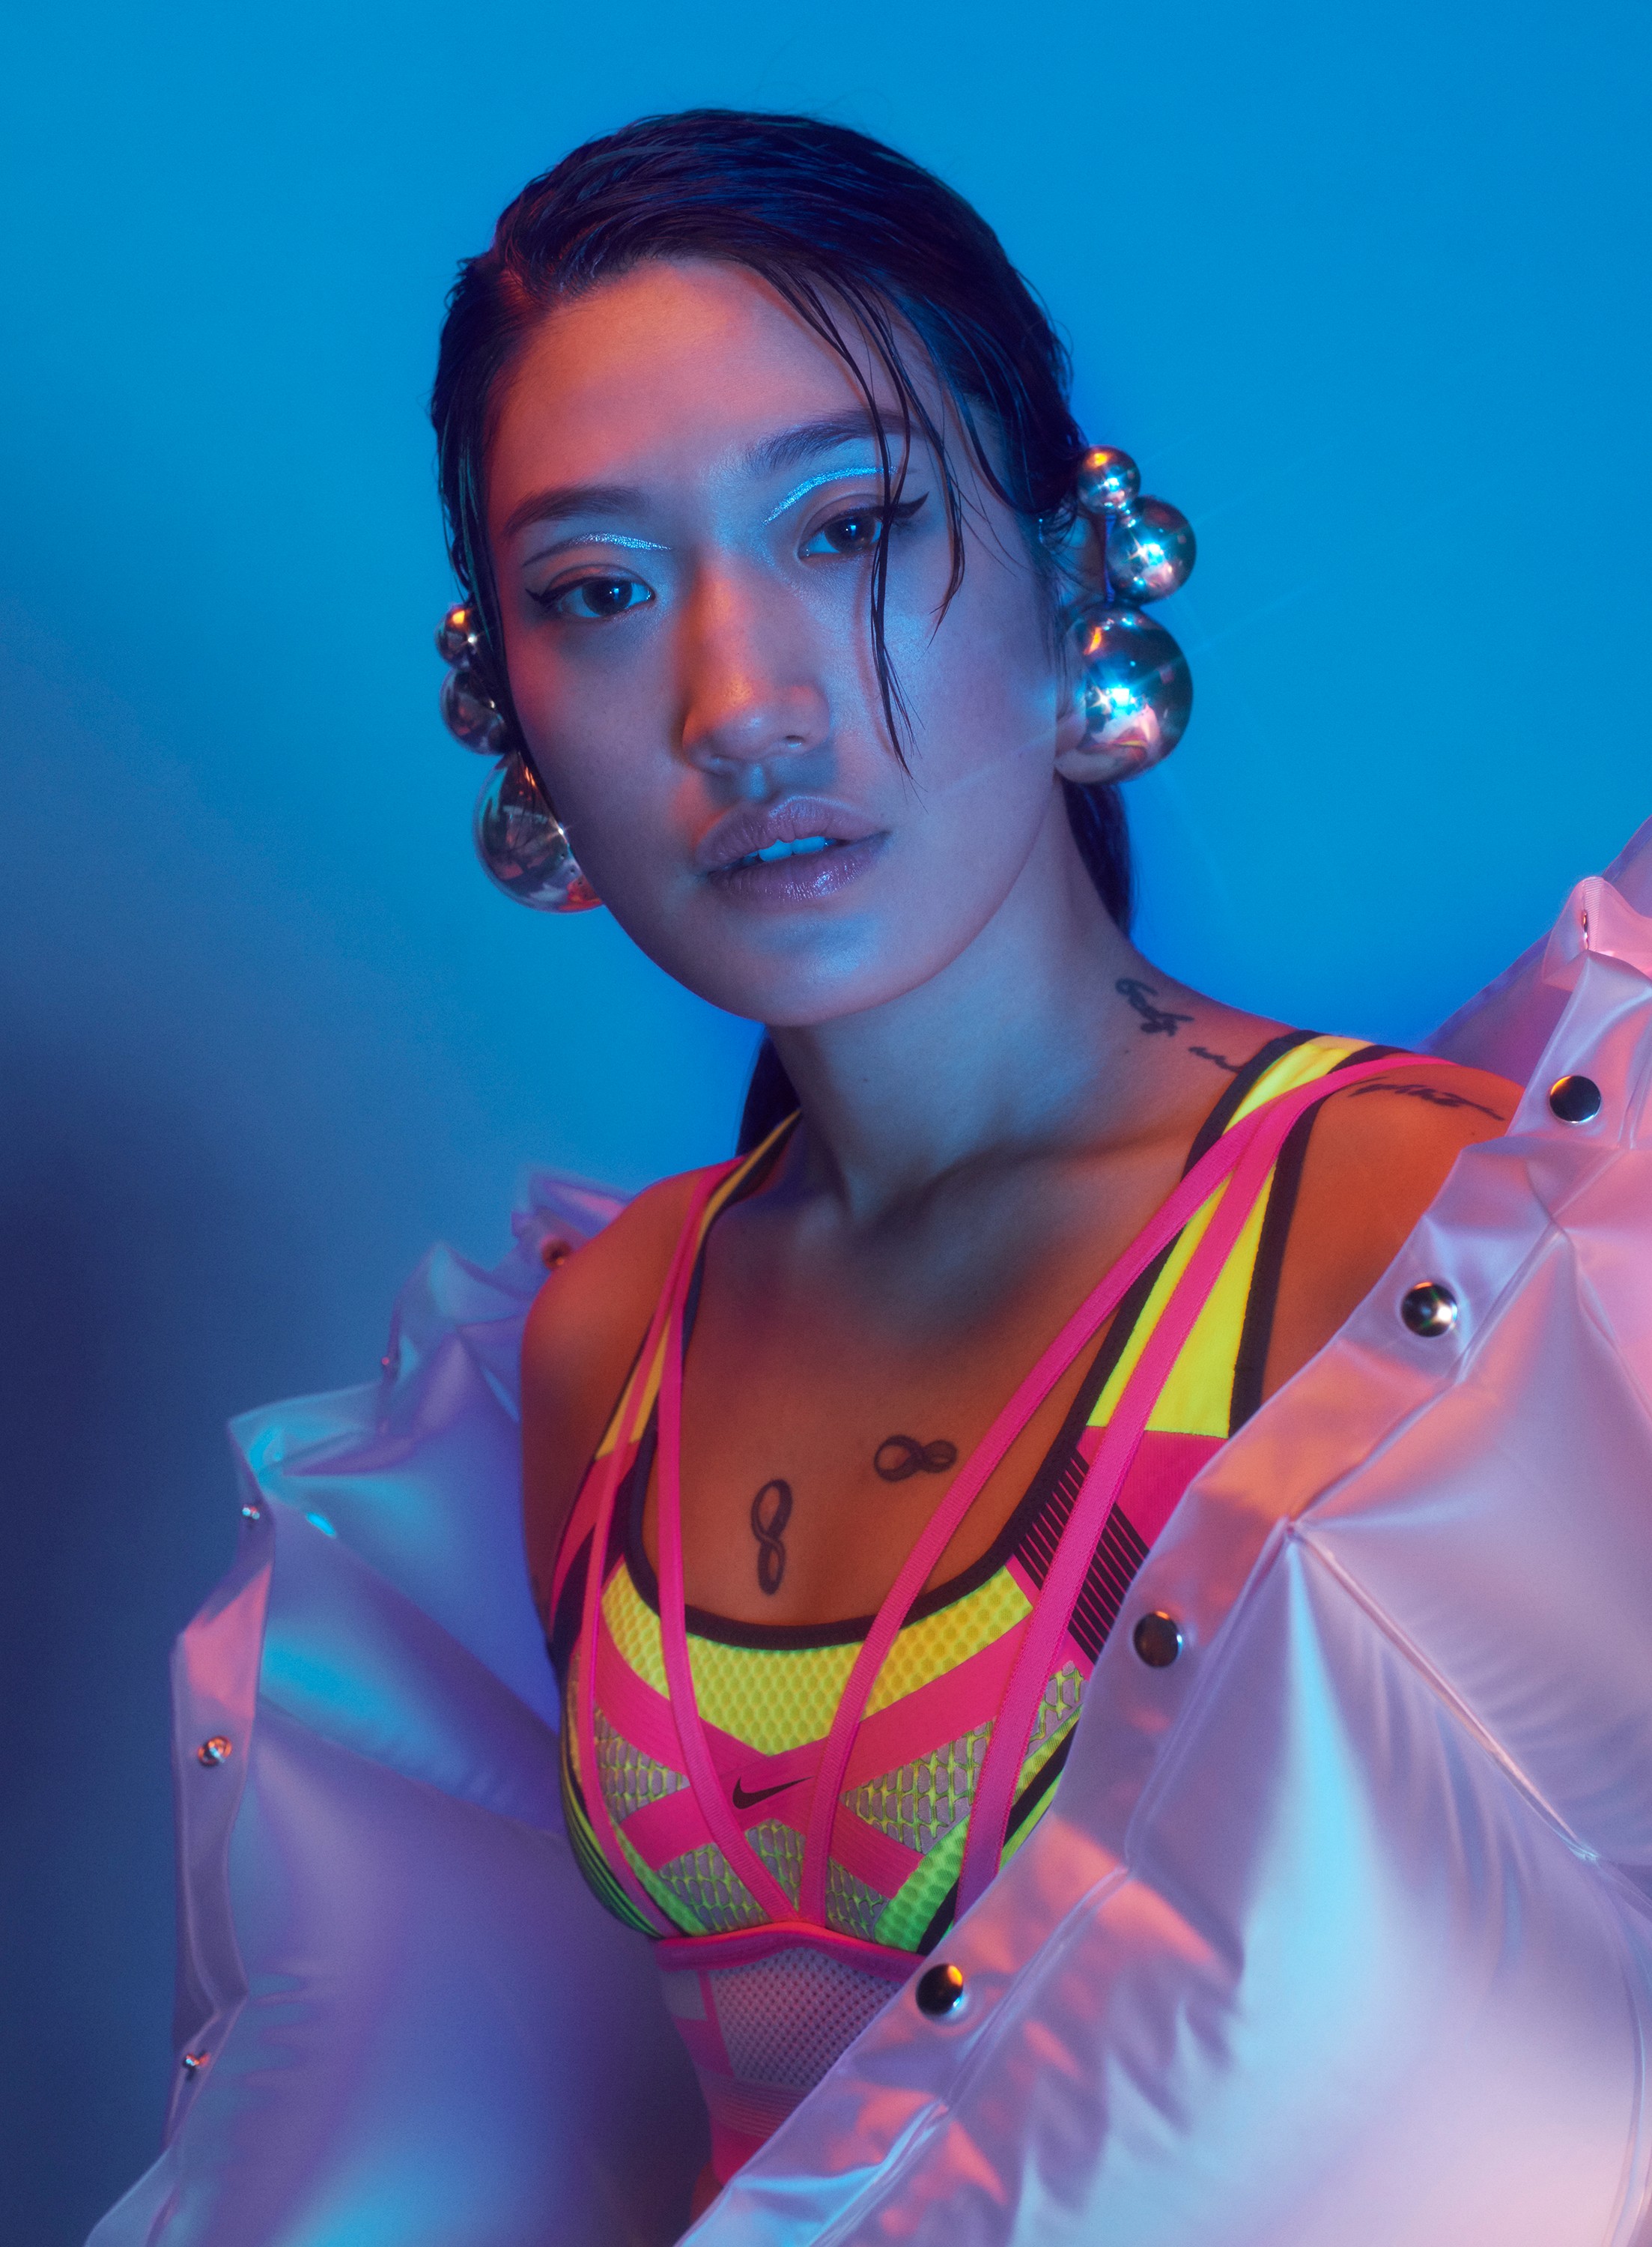 METCHA  6 things you need to know about Peggy Gou